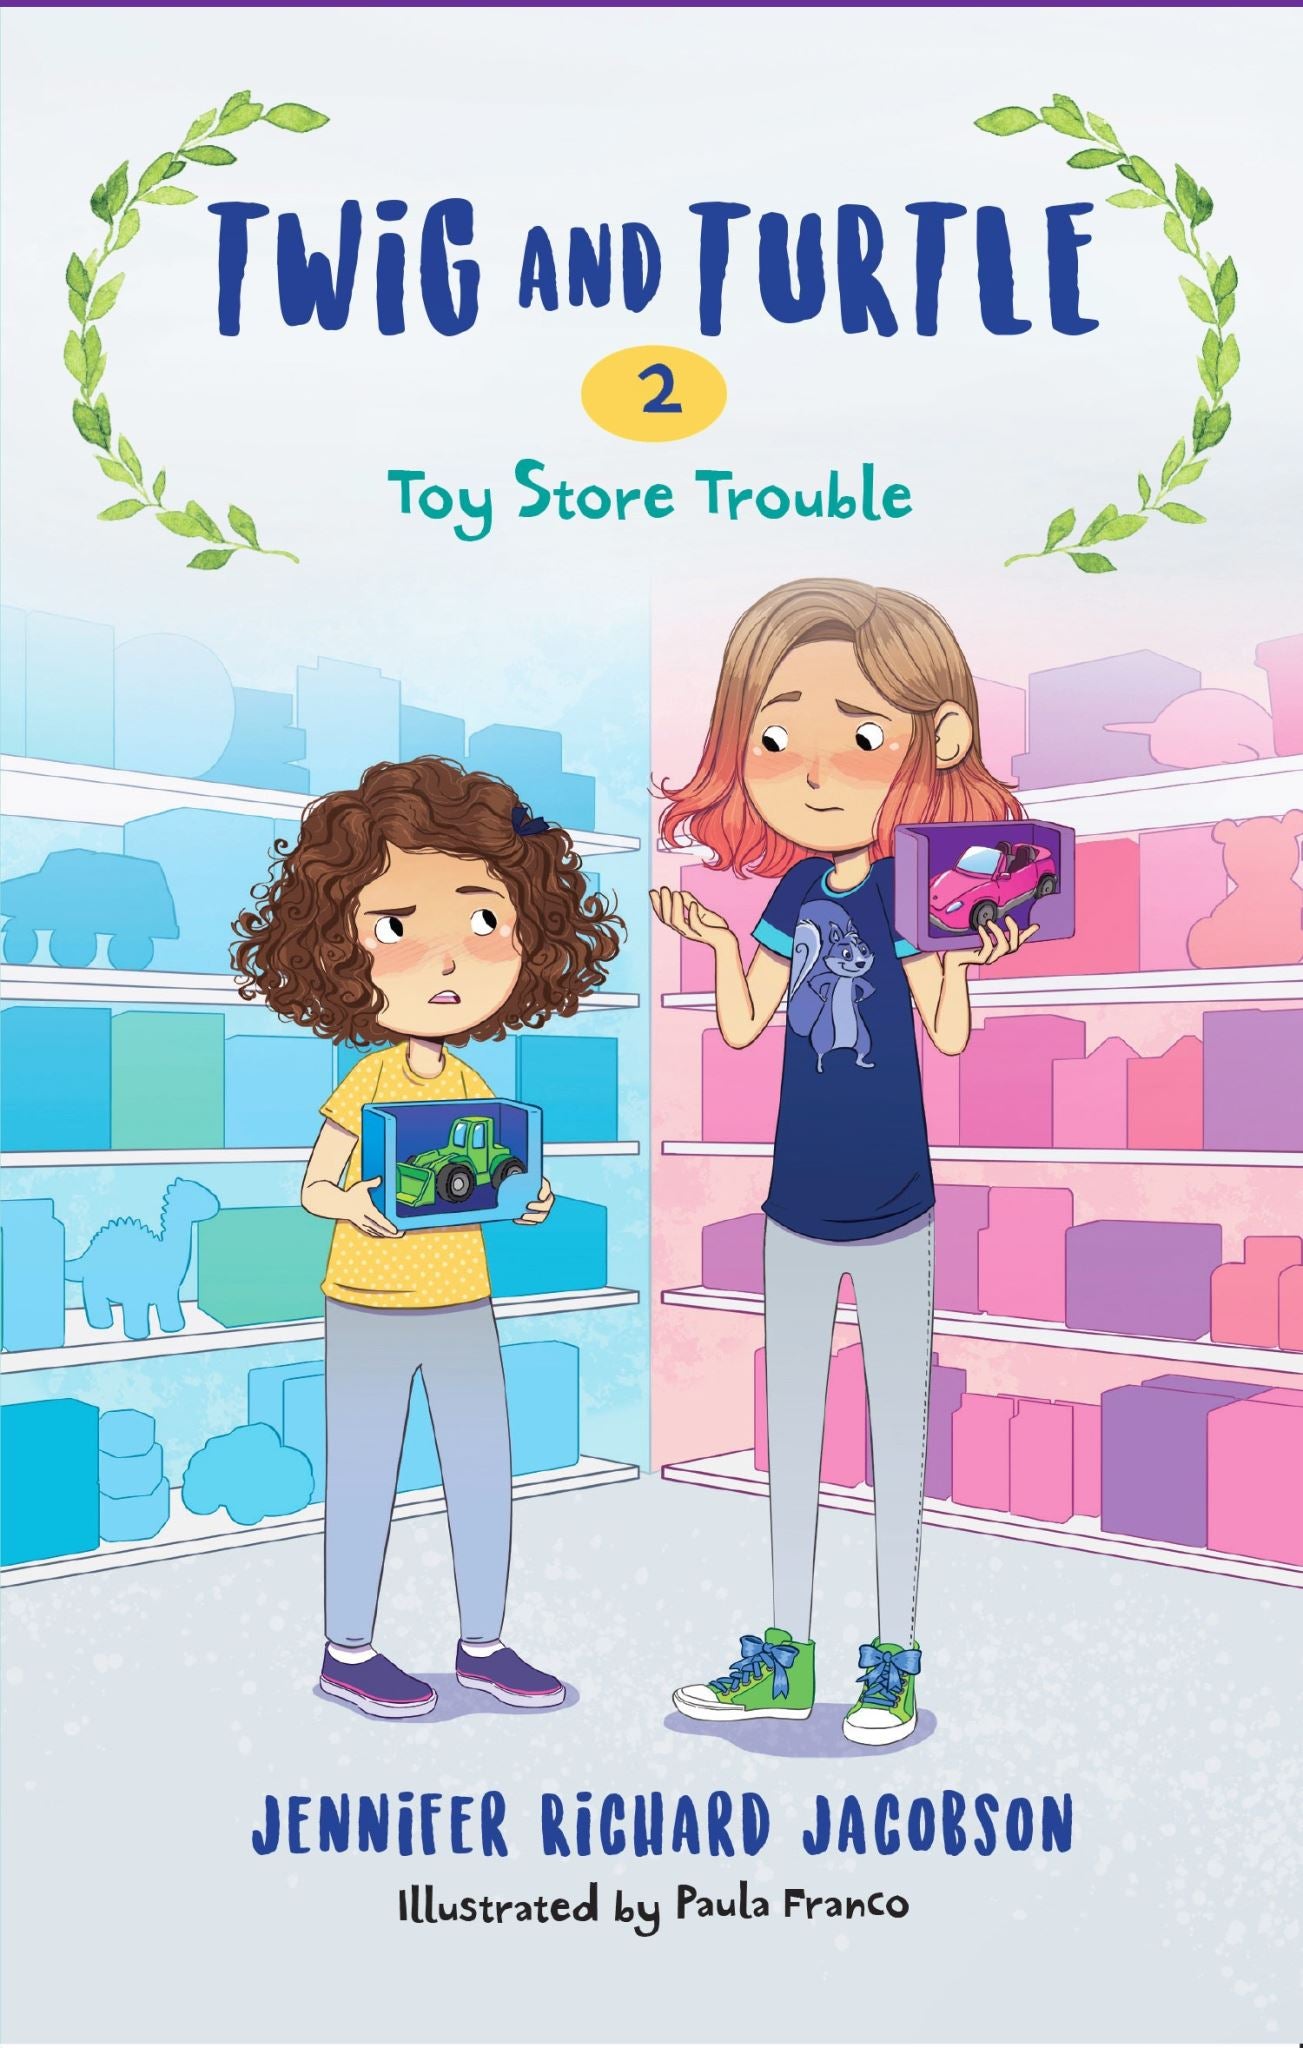 Twig and Turtle 2 Toy Store Trouble